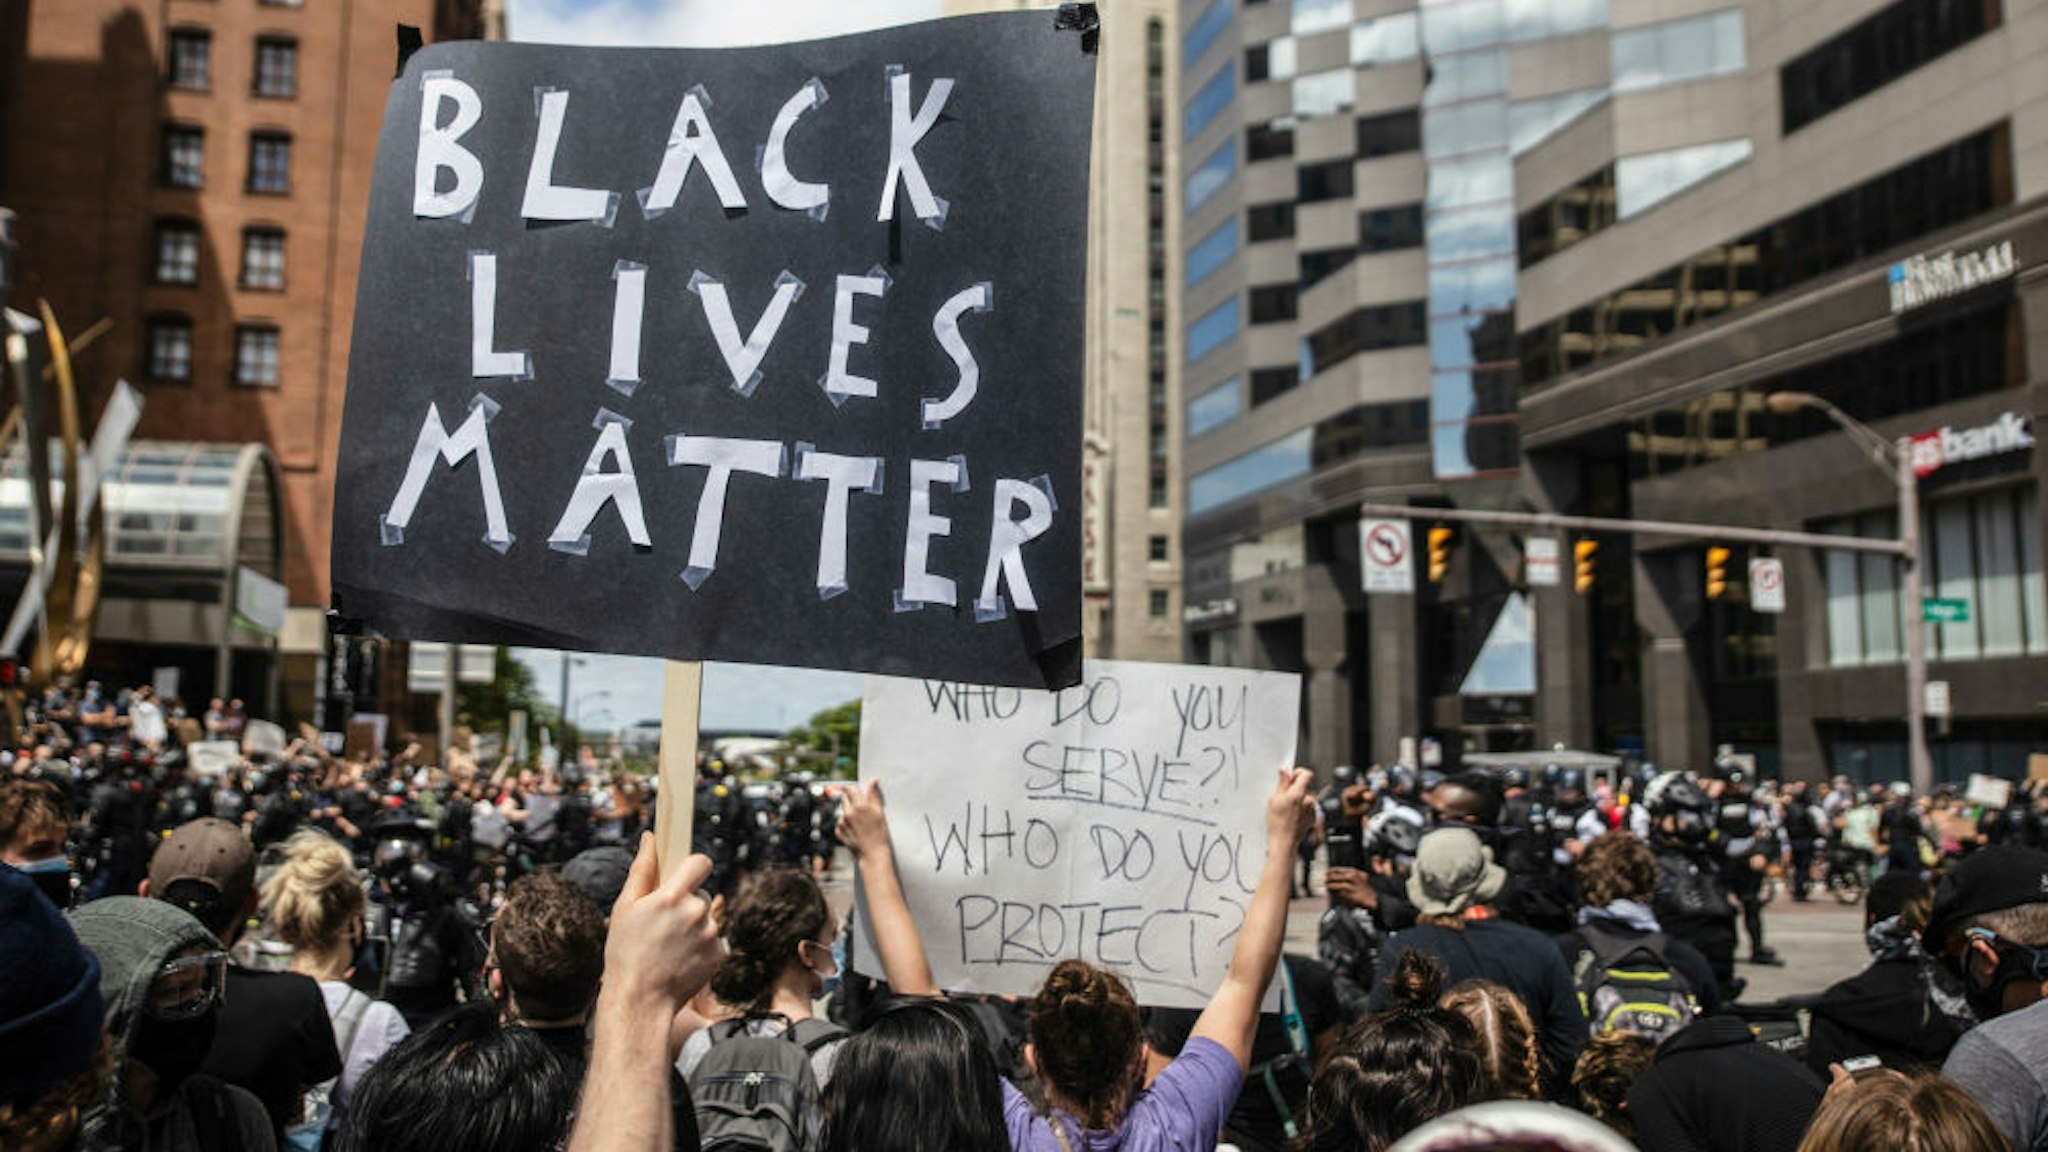 A protester holds a placard that says Black Lives Matter during the demonstration.